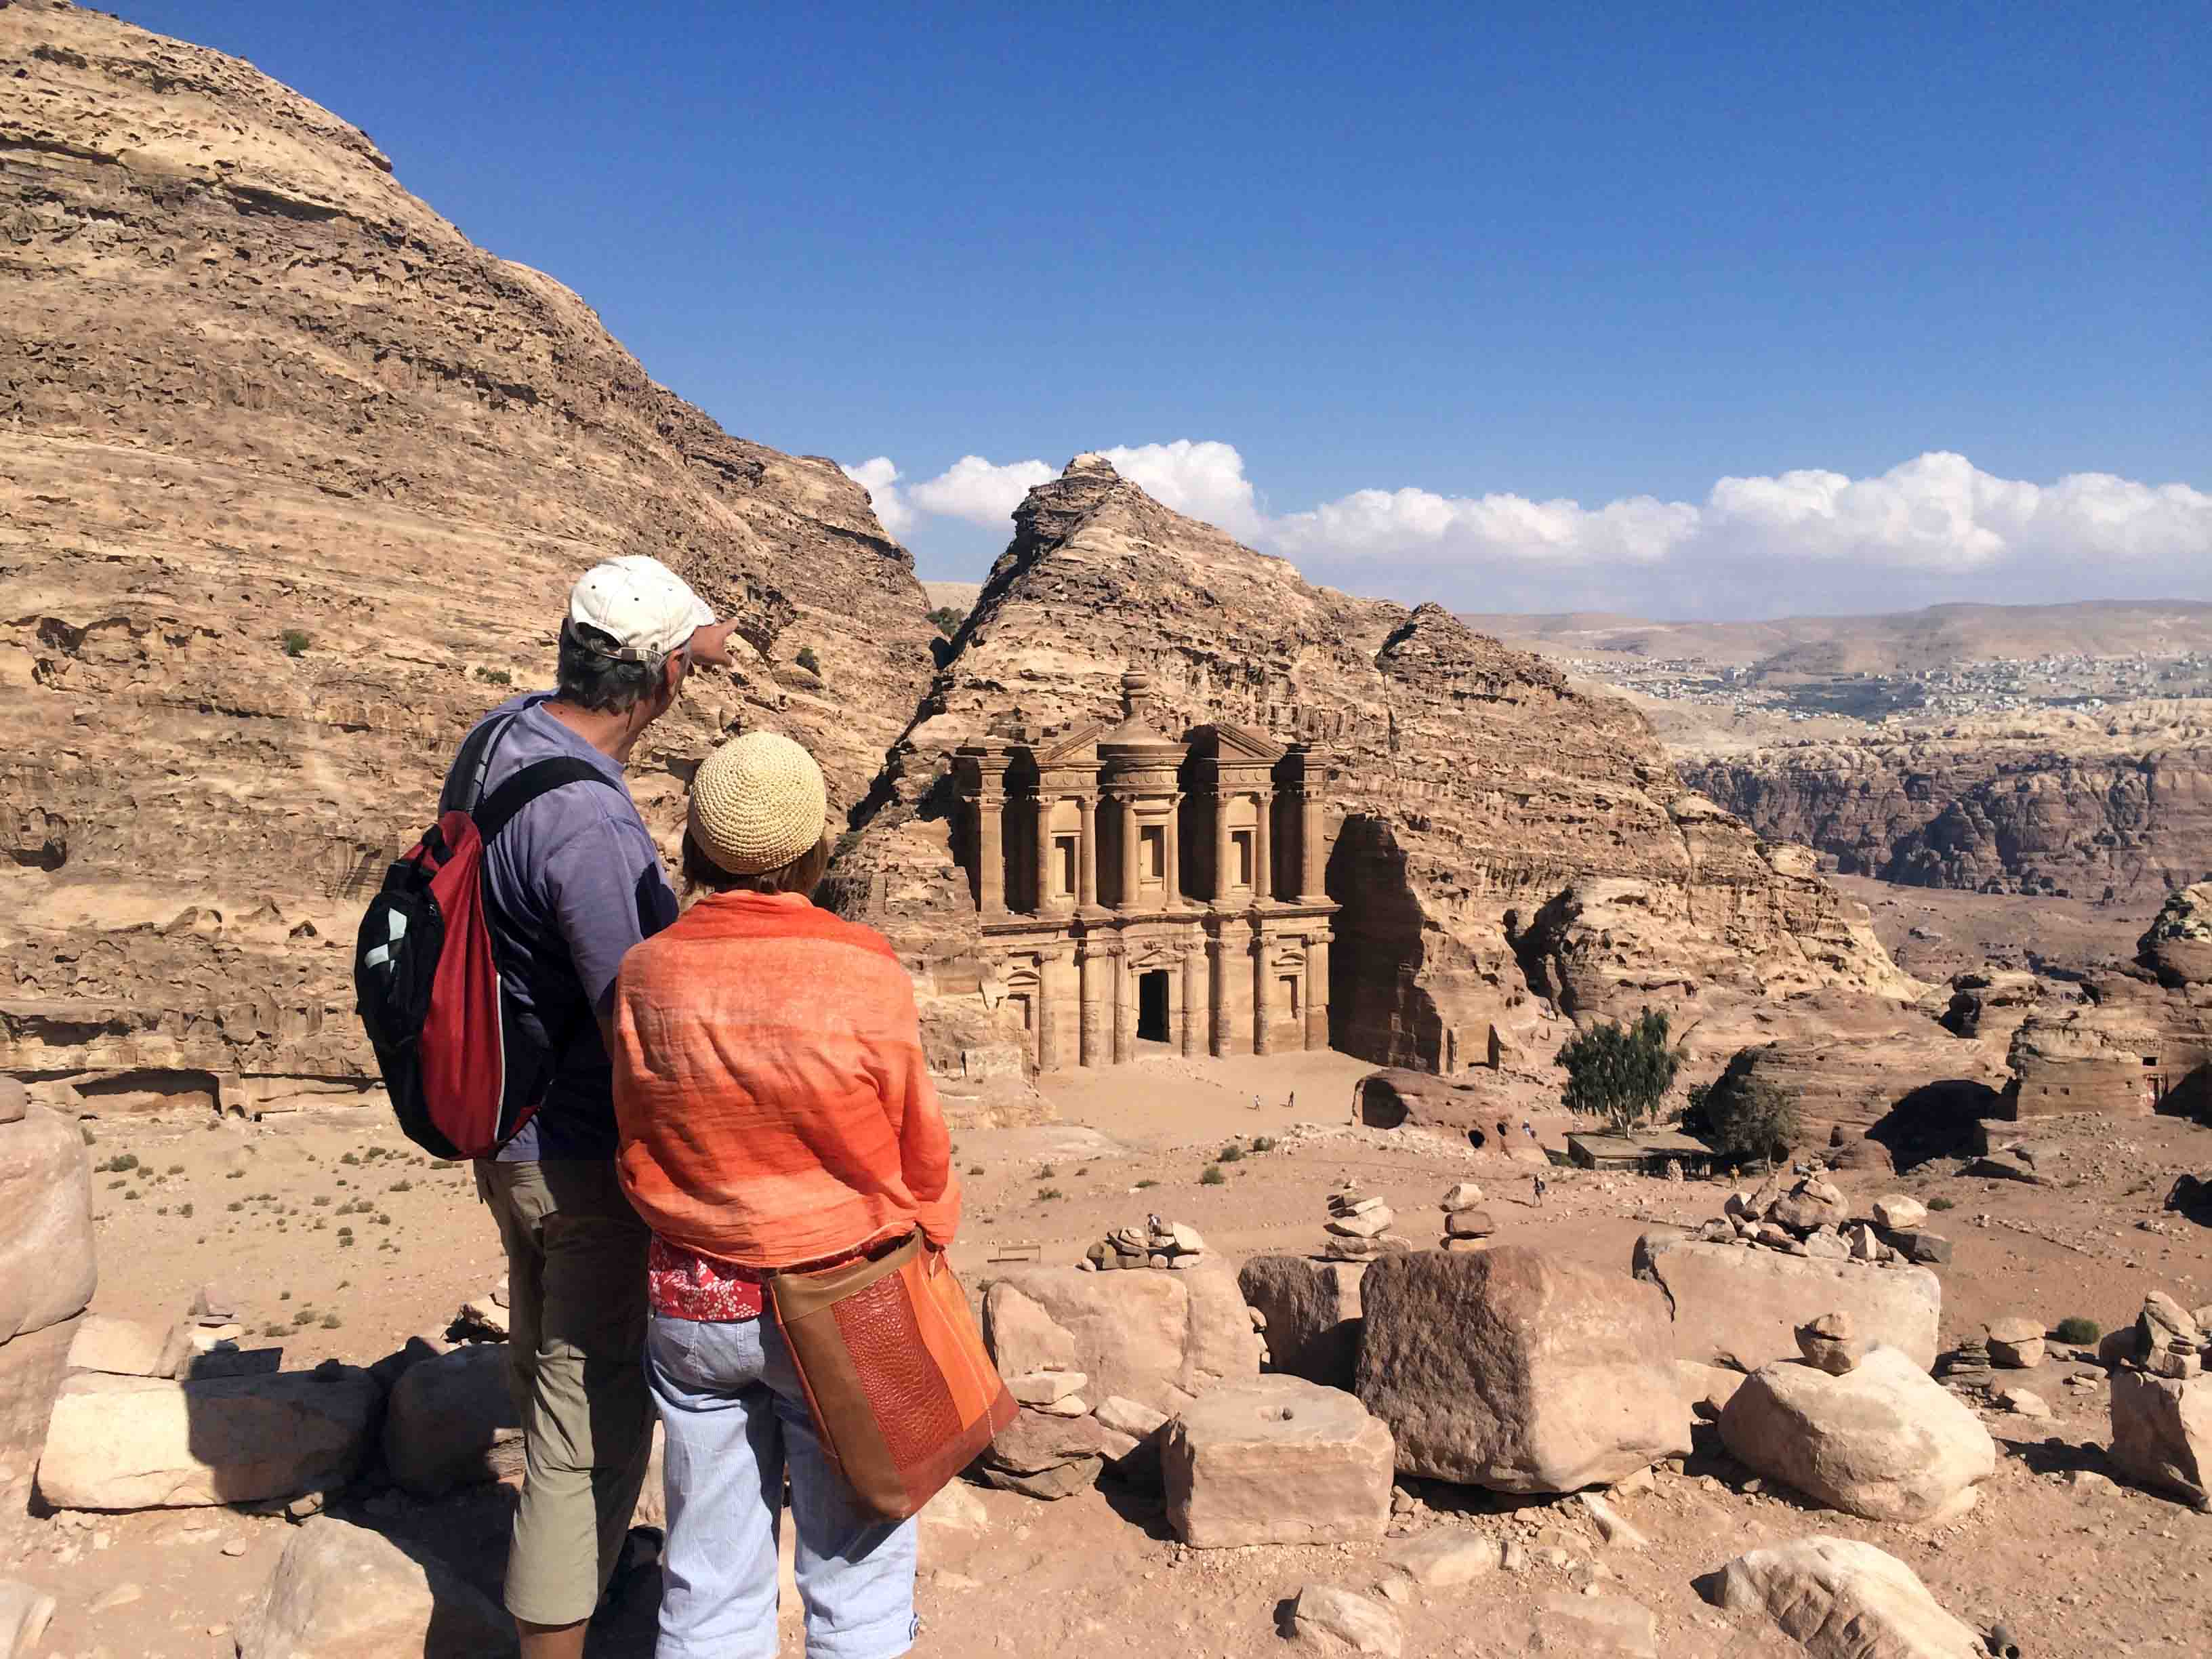 Tips for Hiking to the Monastery in Petra, Jordan